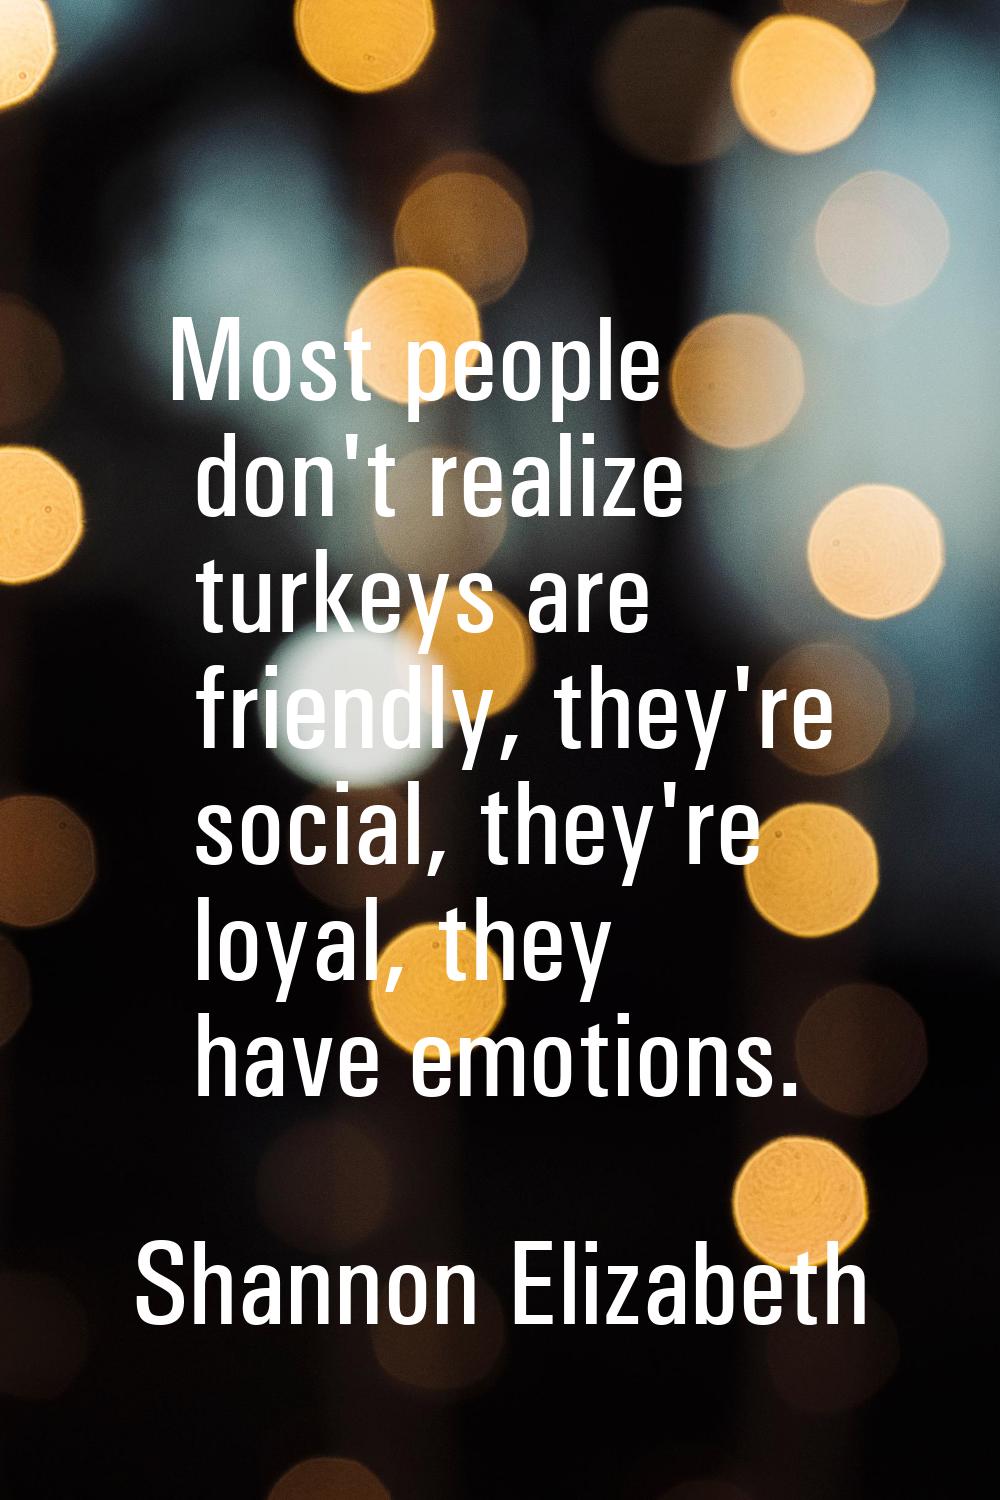 Most people don't realize turkeys are friendly, they're social, they're loyal, they have emotions.